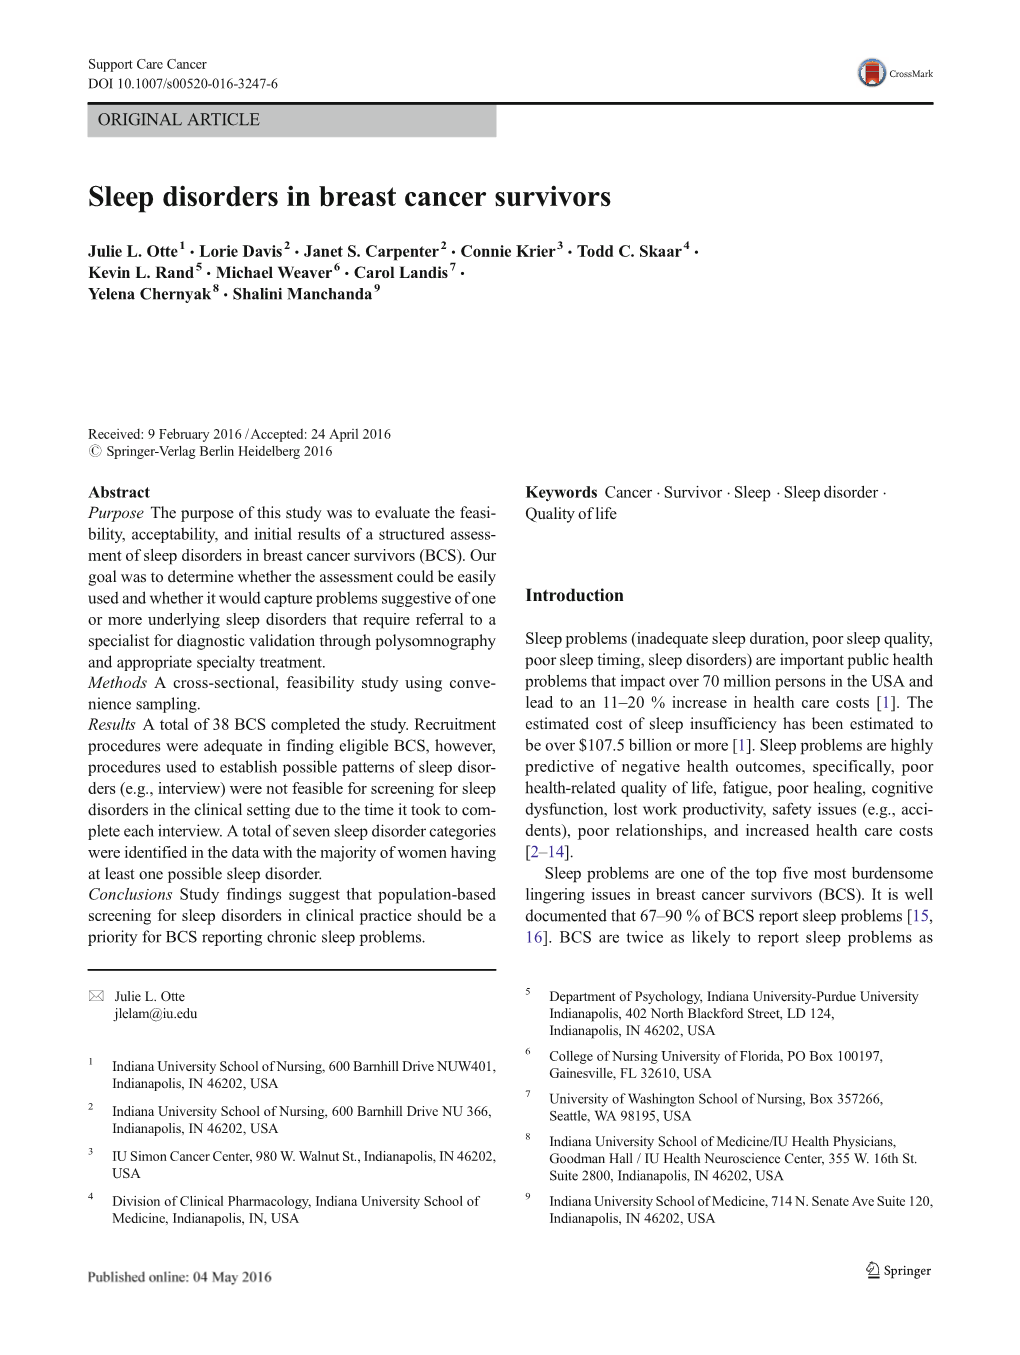 Sleep Disorders in Breast Cancer Survivors